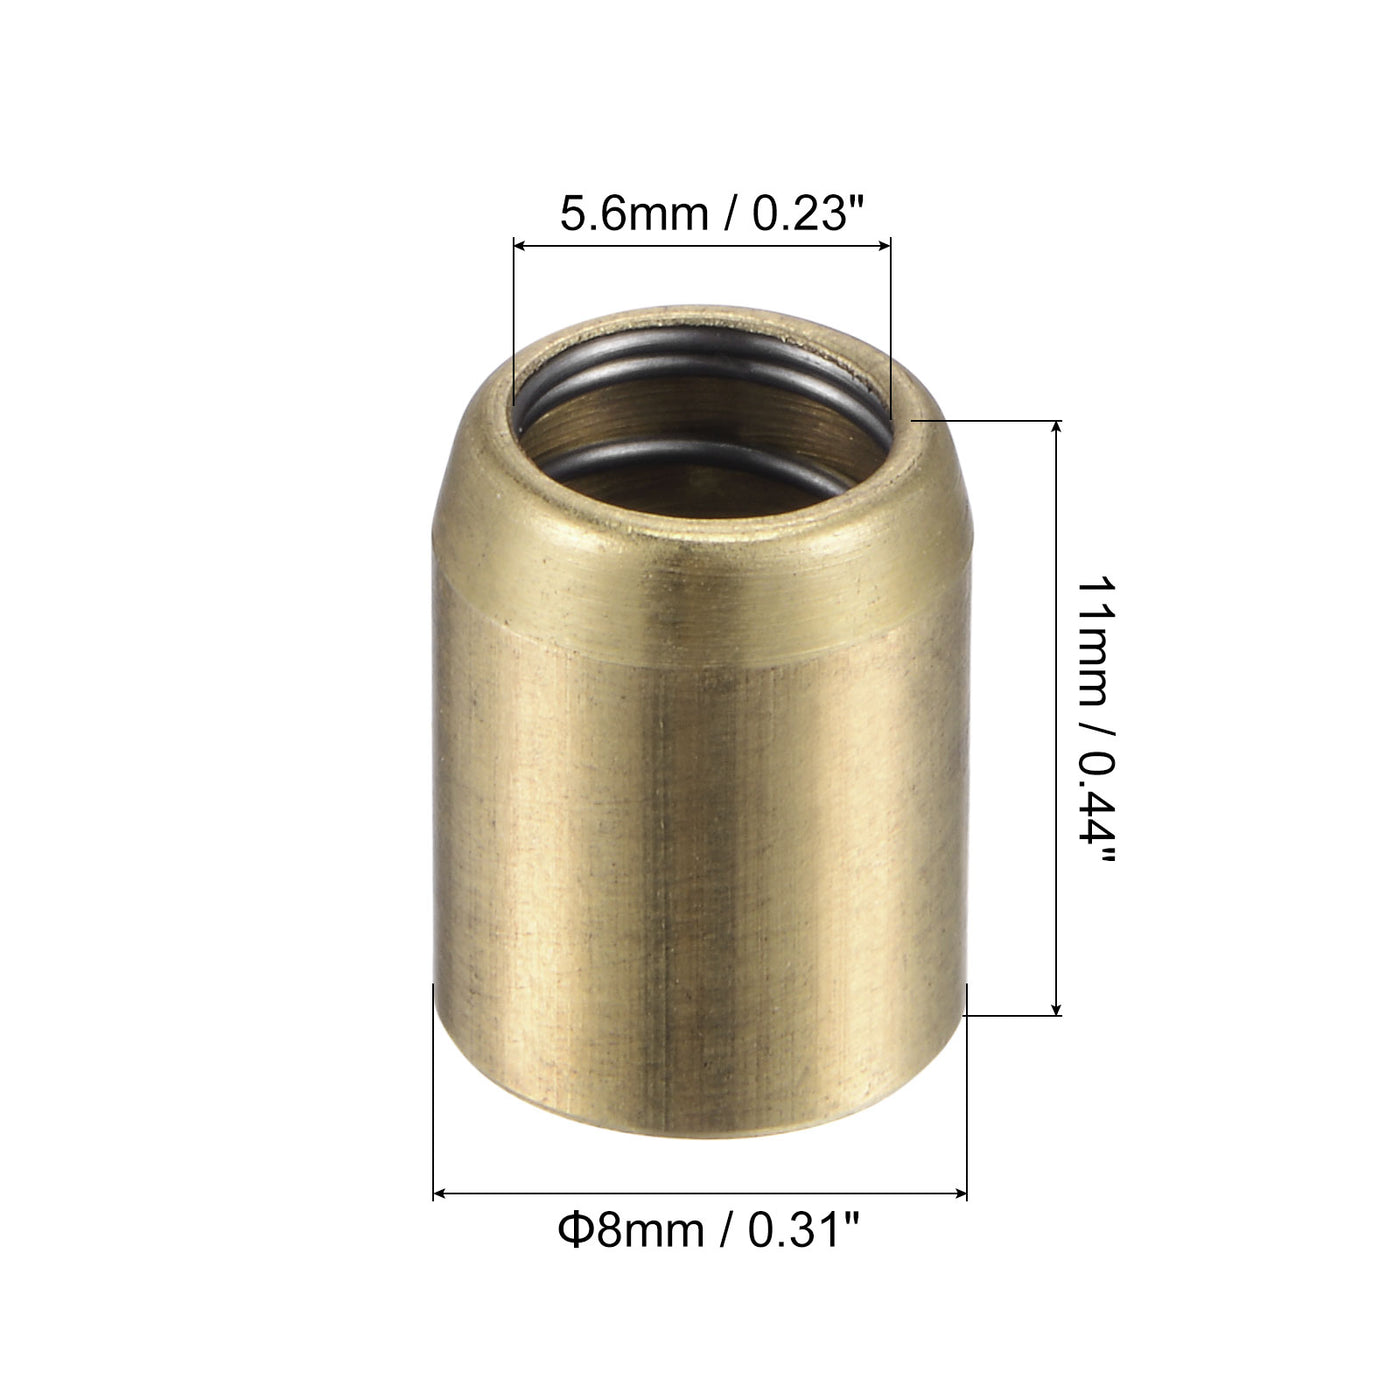 Uxcell Uxcell Brass Push Button Grease Oil Cup 6x6mm Ball Oiler for Lubrication System 10Pcs